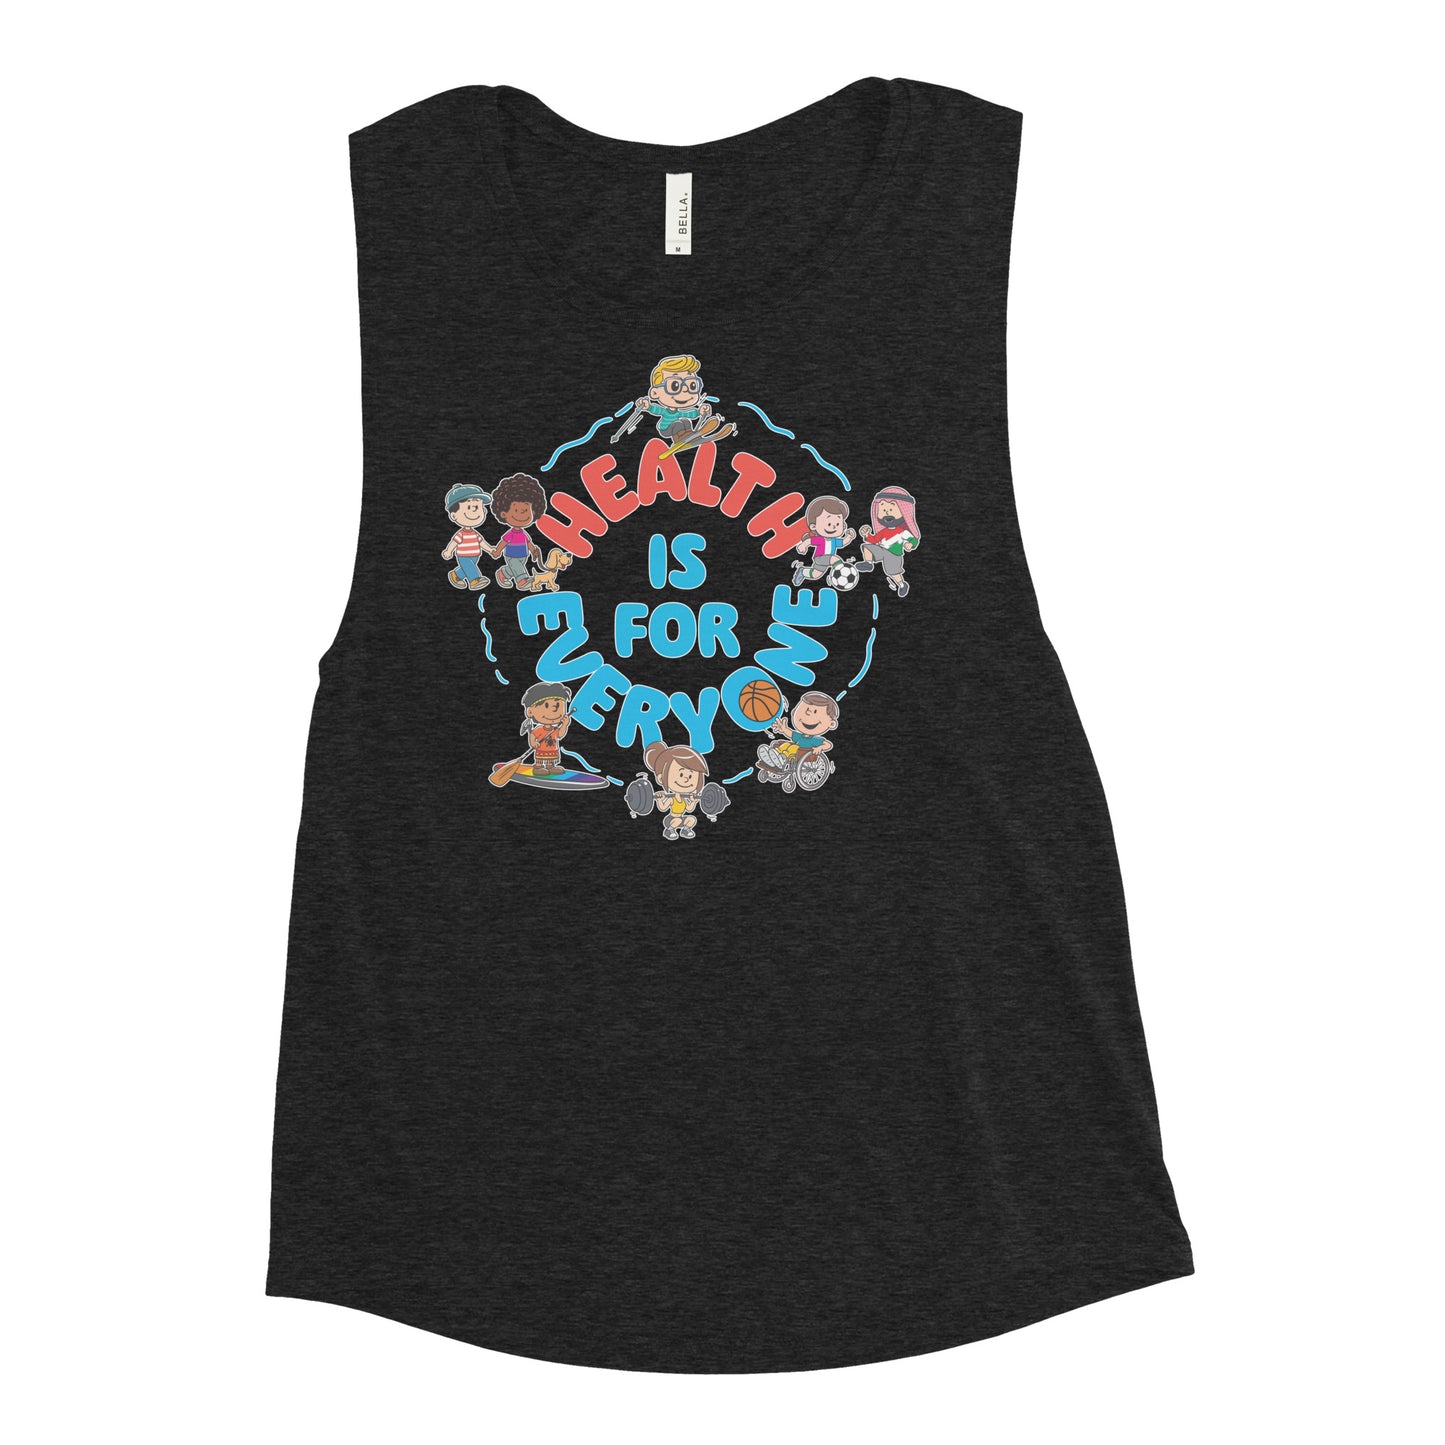 Health Is For Everyone Ladies’ Muscle Tank